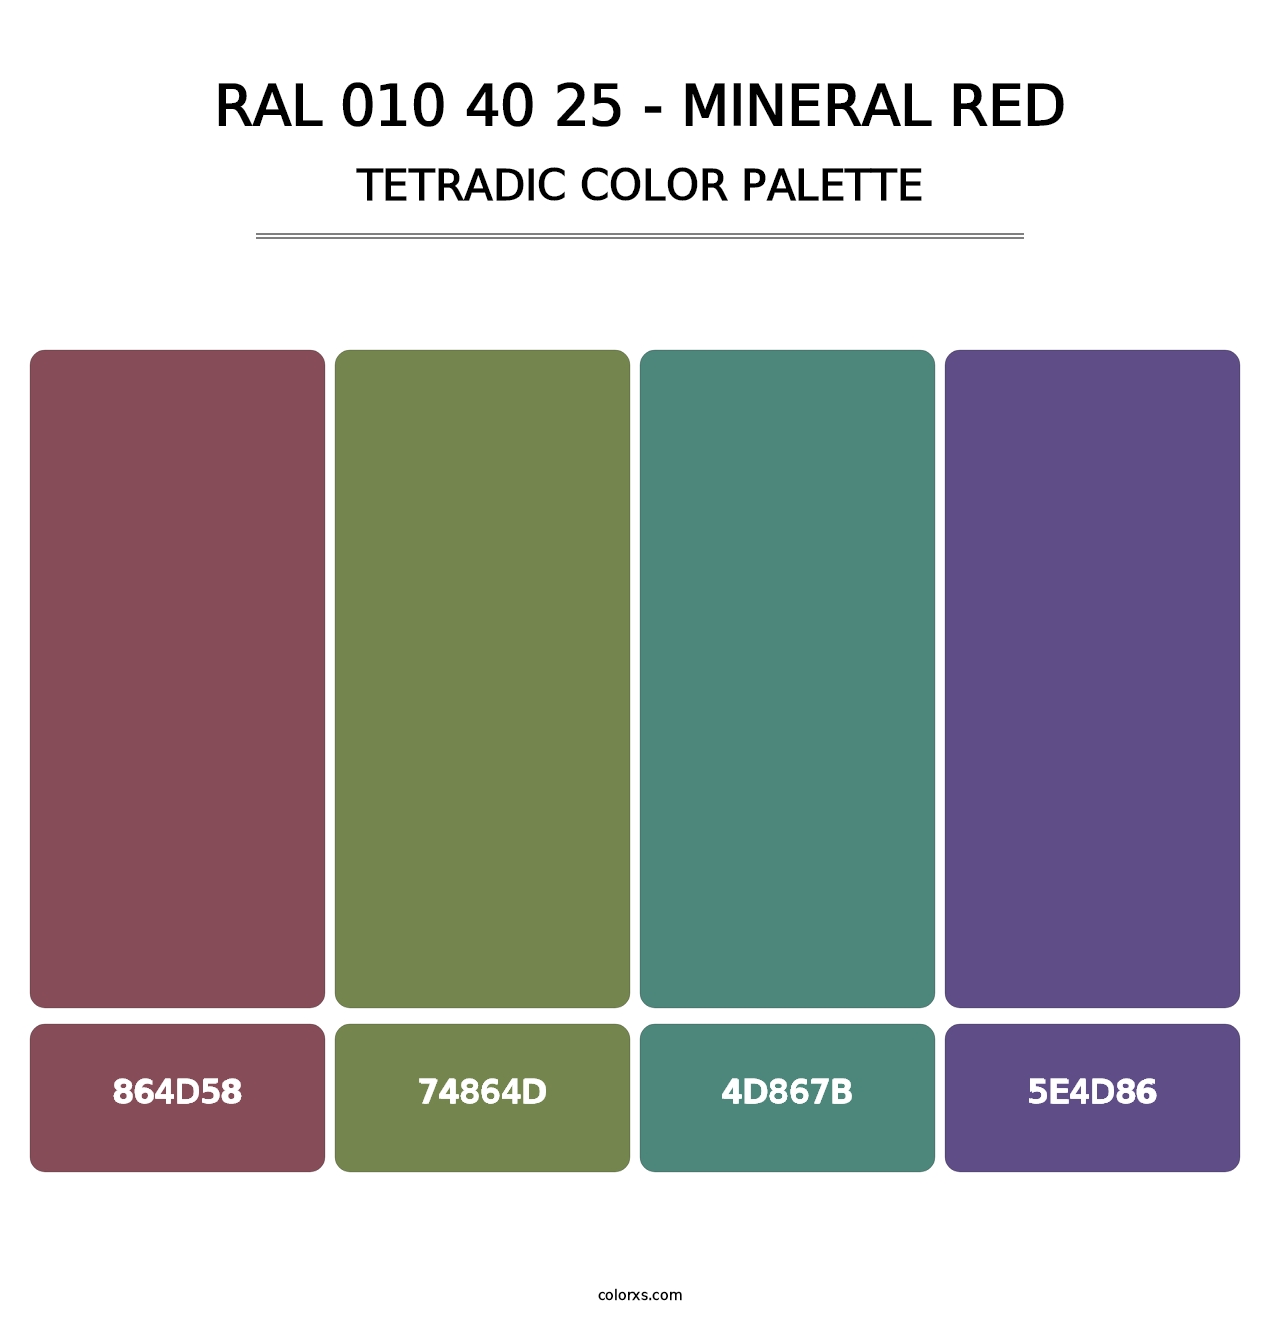 RAL 010 40 25 - Mineral Red - Tetradic Color Palette